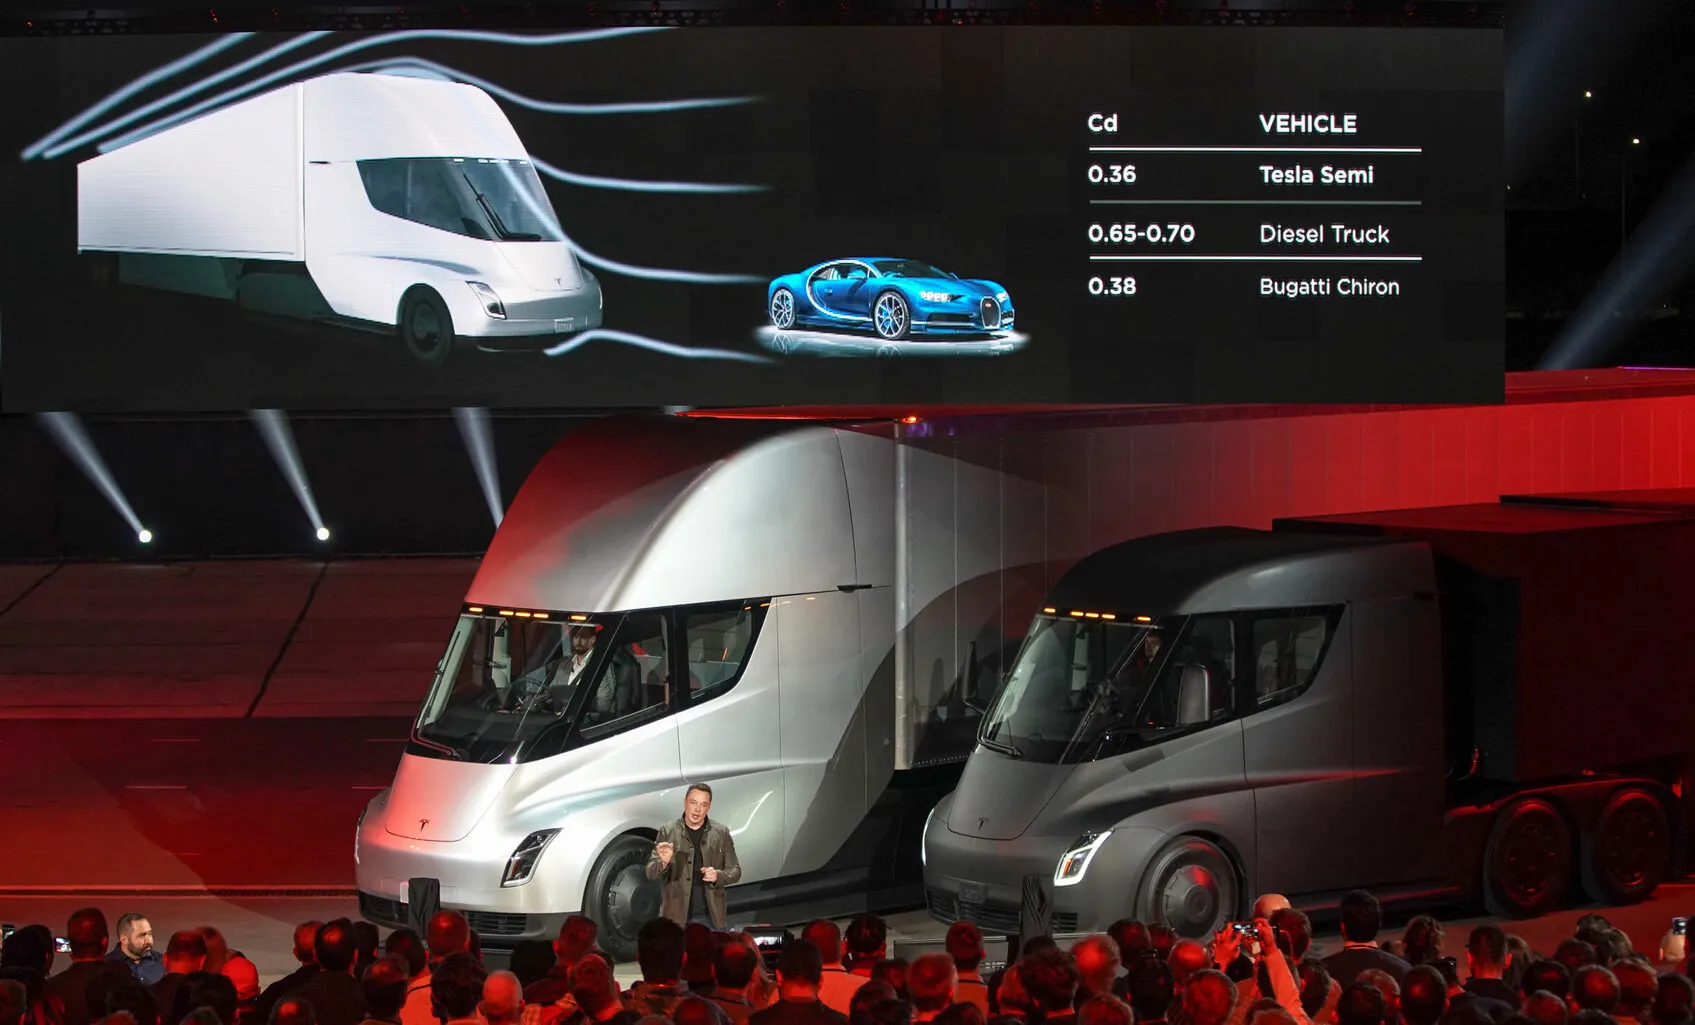 elon musk showing off the tesla trucking analytics of arrow dynamics compared to Bugatti with both trucks.